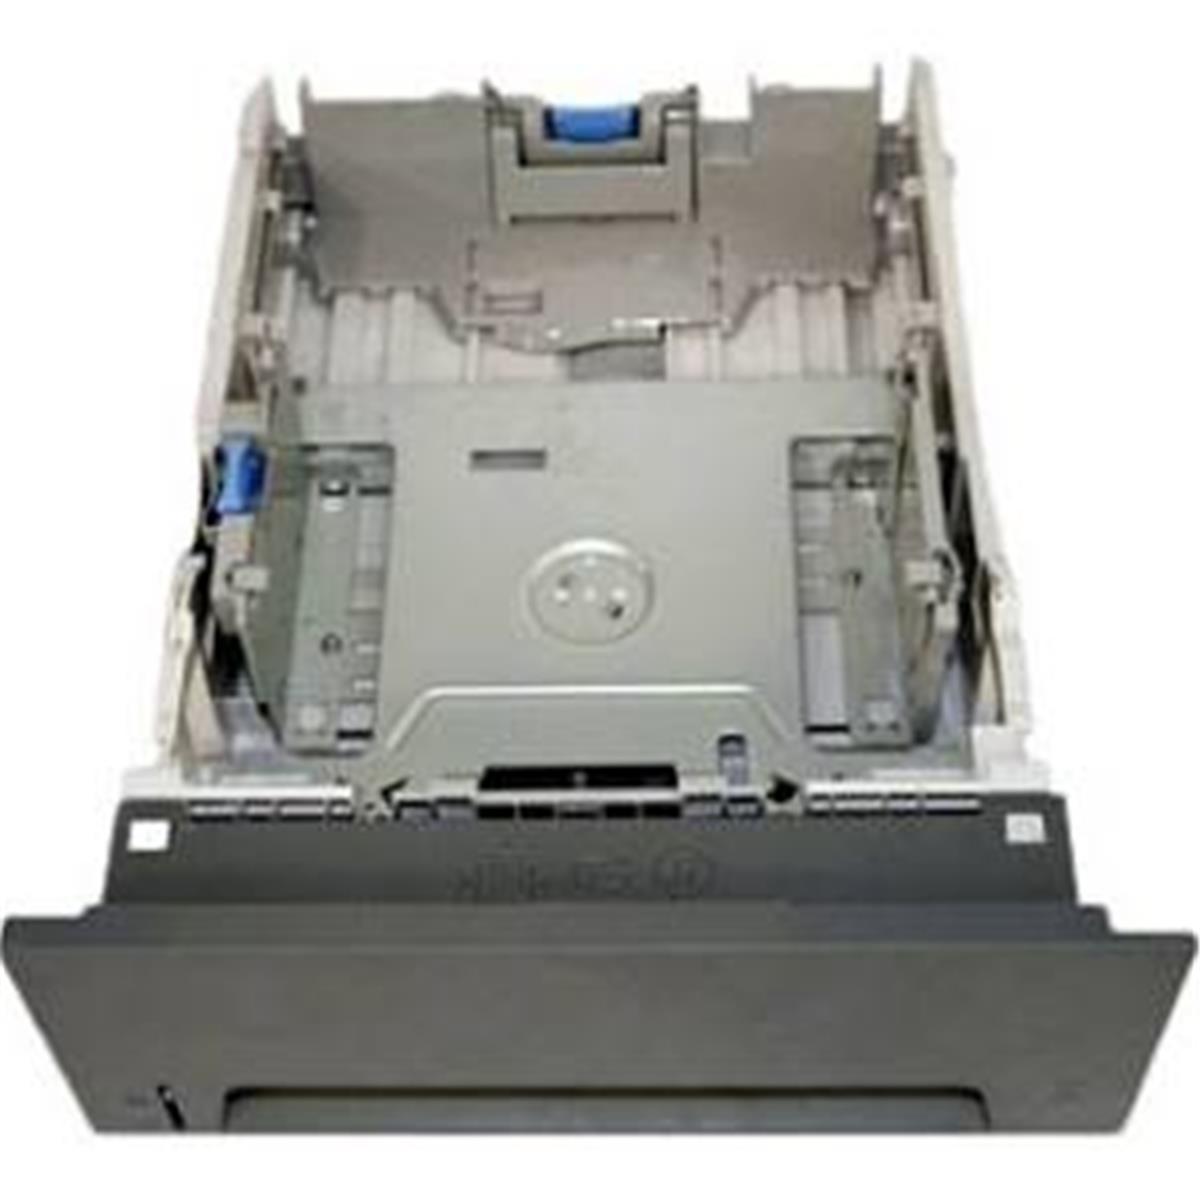 Rm1-3796-oem 500 Sheet Input Tray For M3035